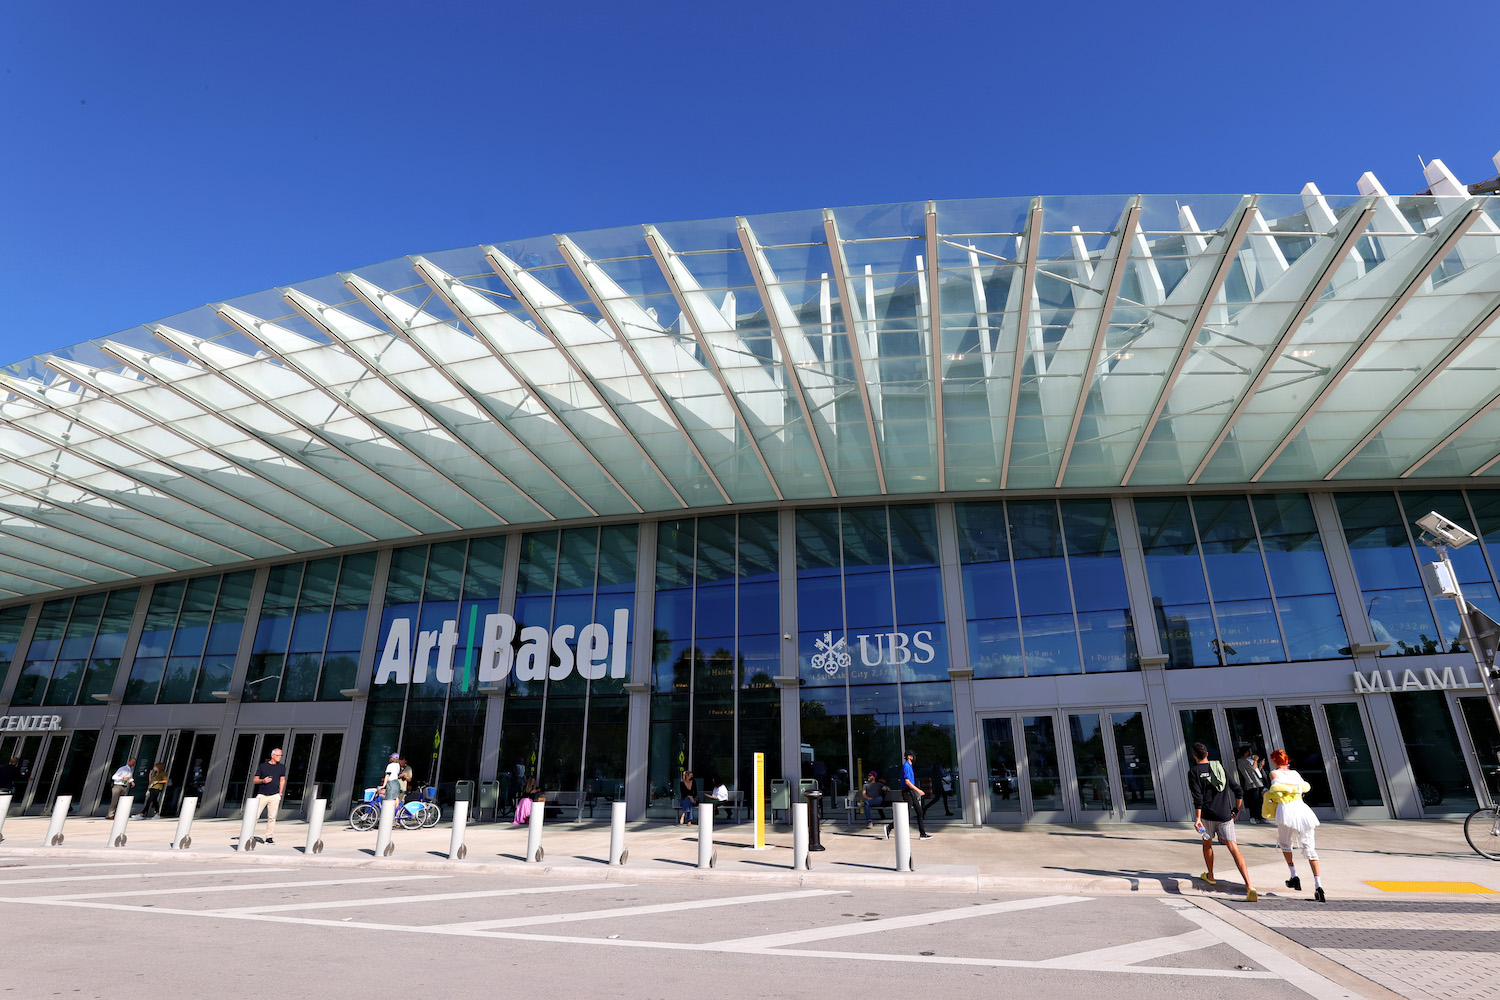 MIAMI, FLORIDA - NOVEMBER 30: An exterior view of Miami Beach Convention Center during Art Basel Miami Beach on November 30, 2021 in Miami, Florida. (Photo by Cindy Ord/Getty Images)